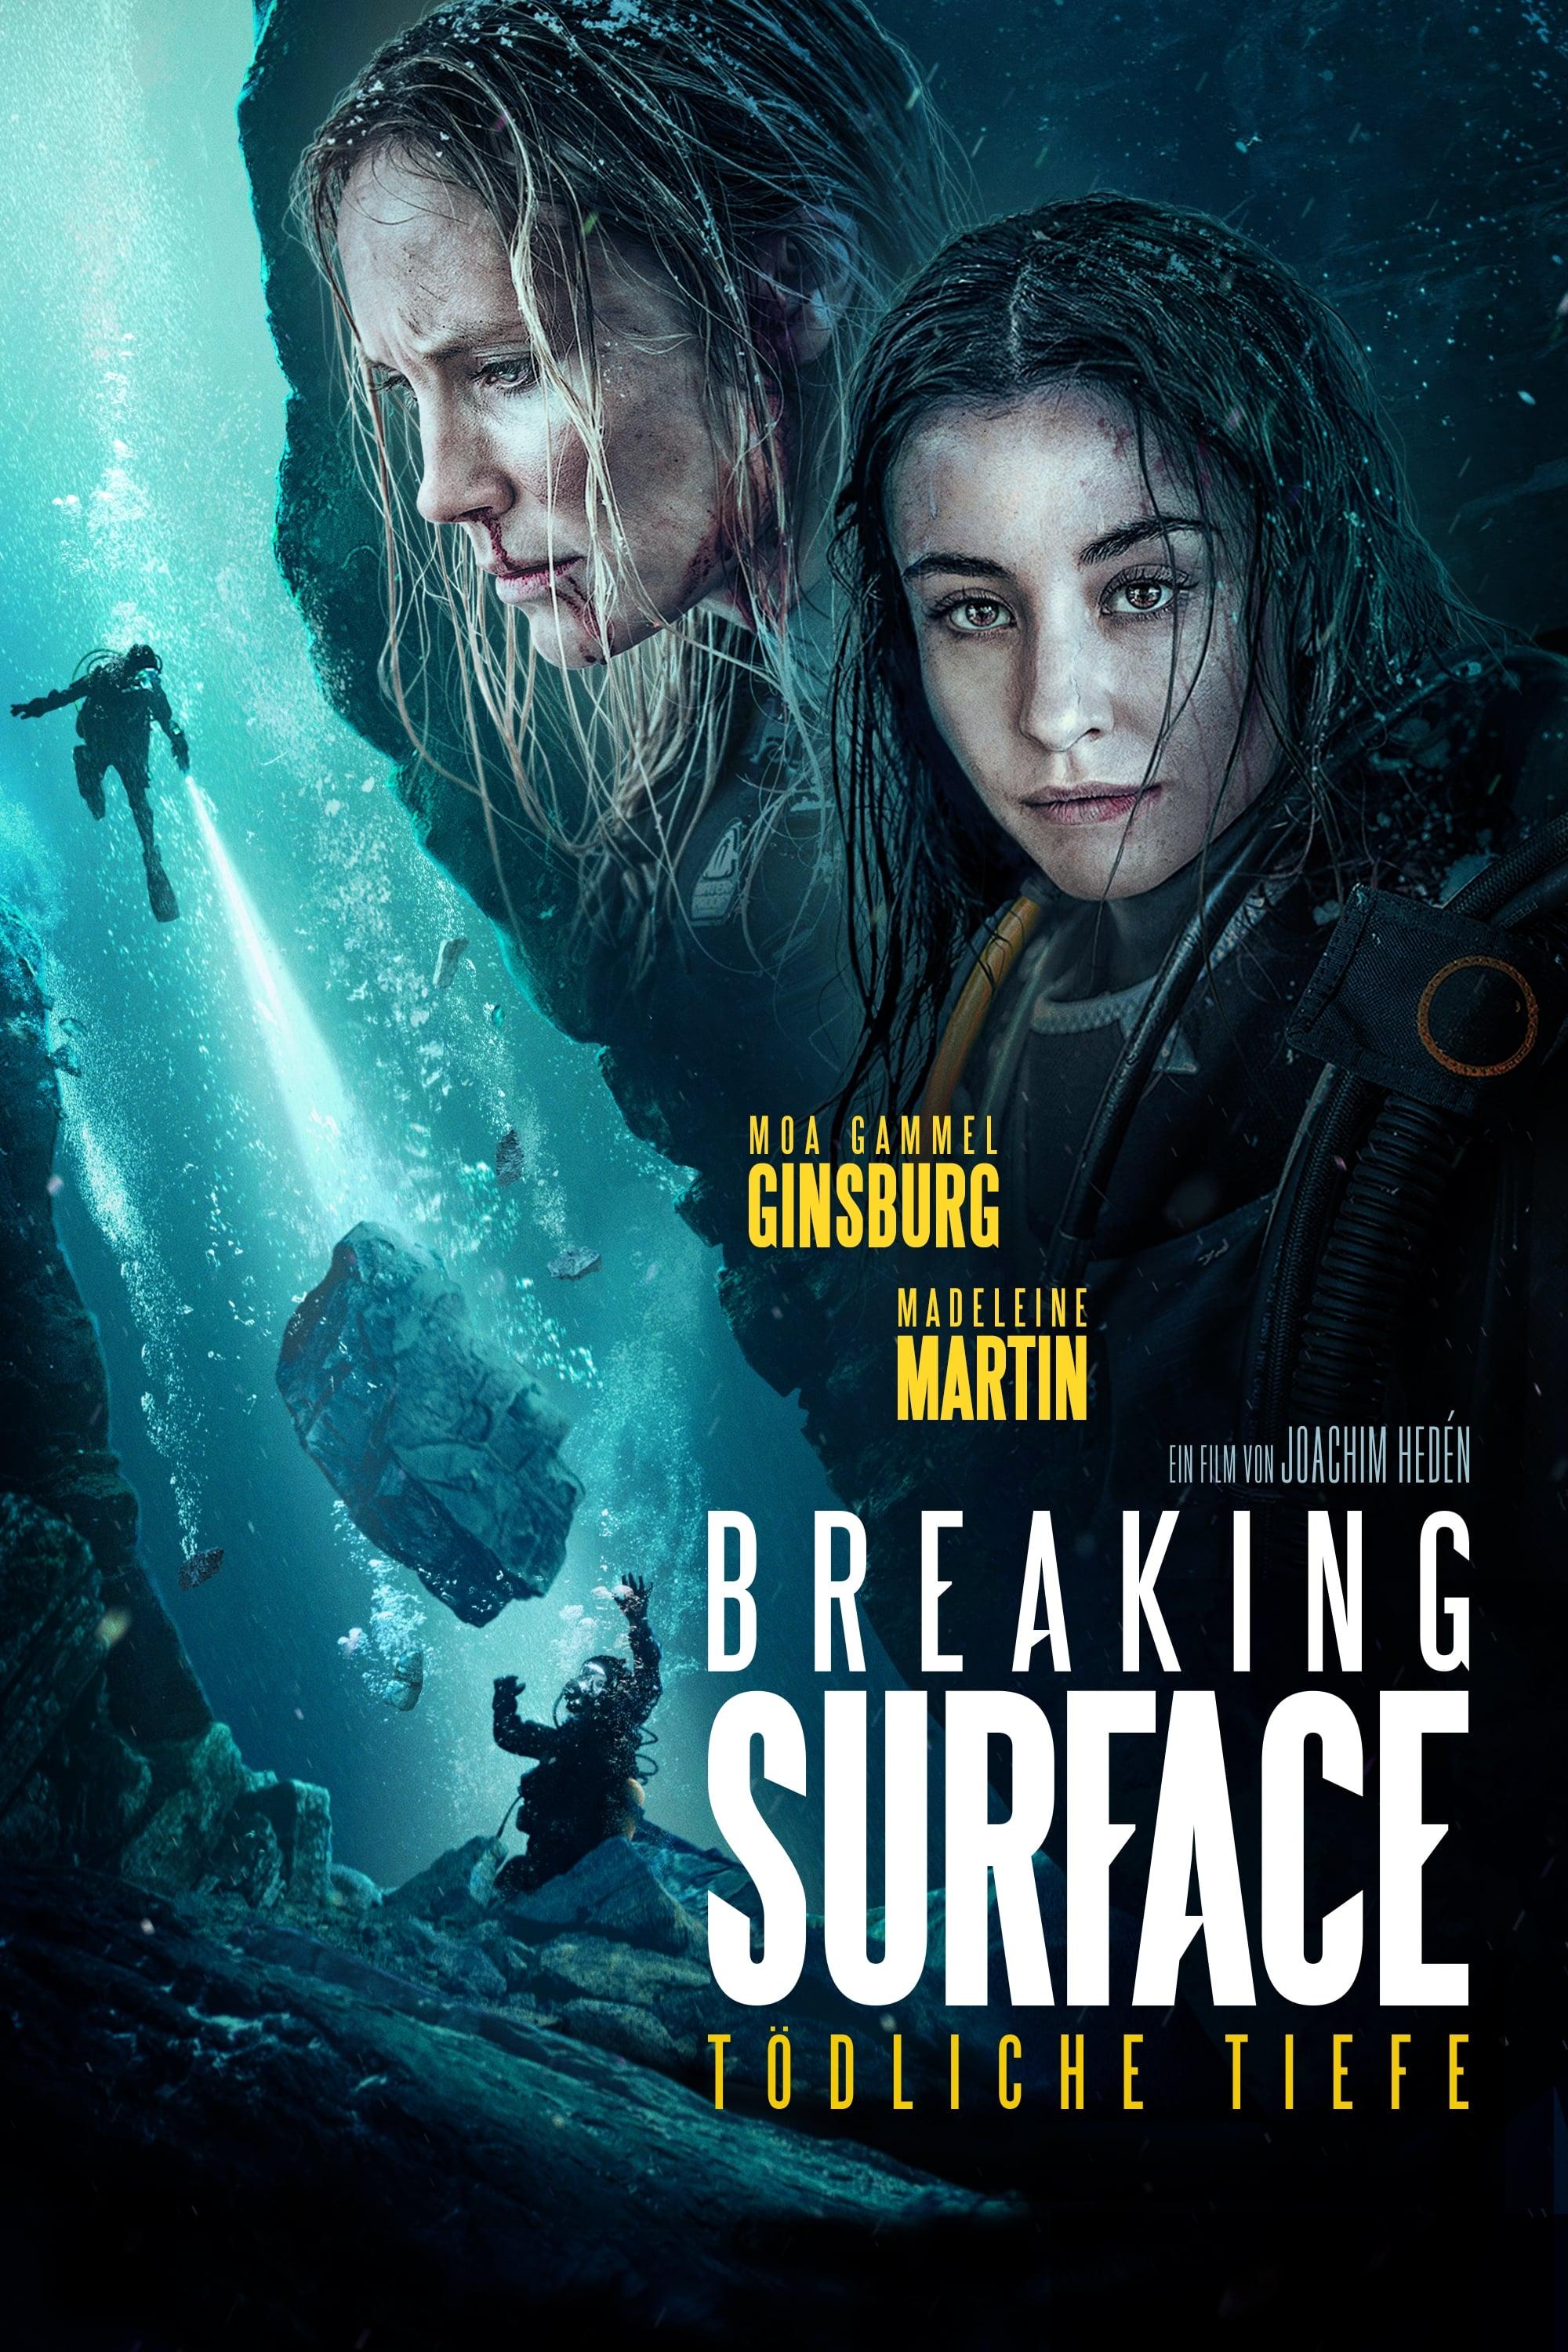 Breaking Surface poster